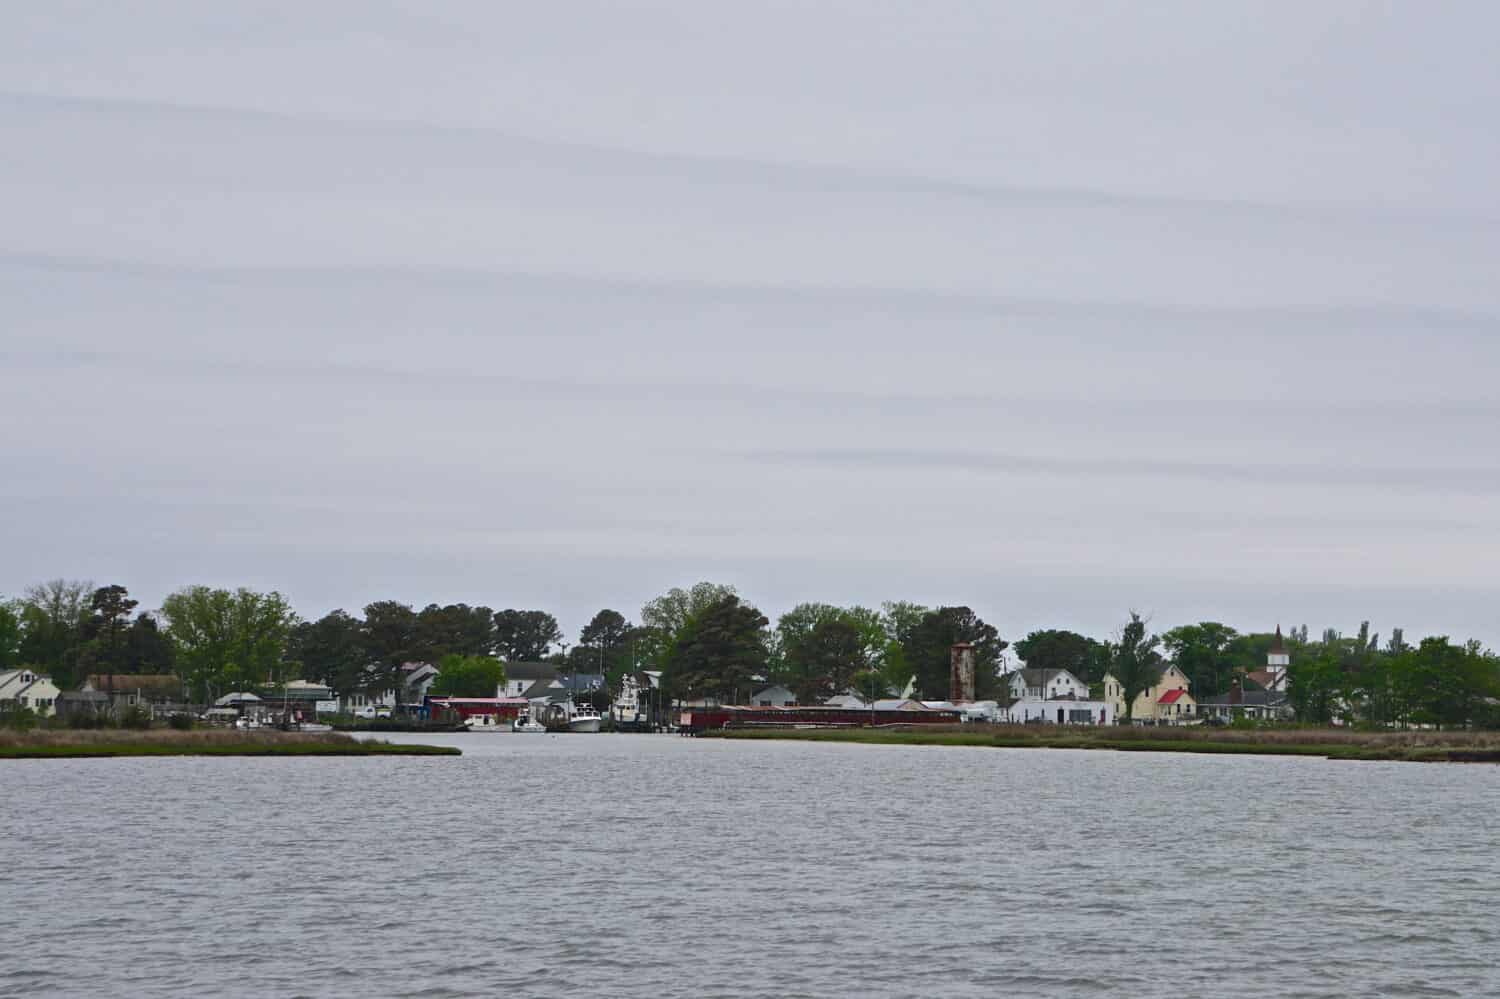 Houses on the coast of Smith Island, Virginia, in the Chesapeake Bay. The Island has been shrinking in size for centuries, due to a combination of its low elevation and storm erosion.